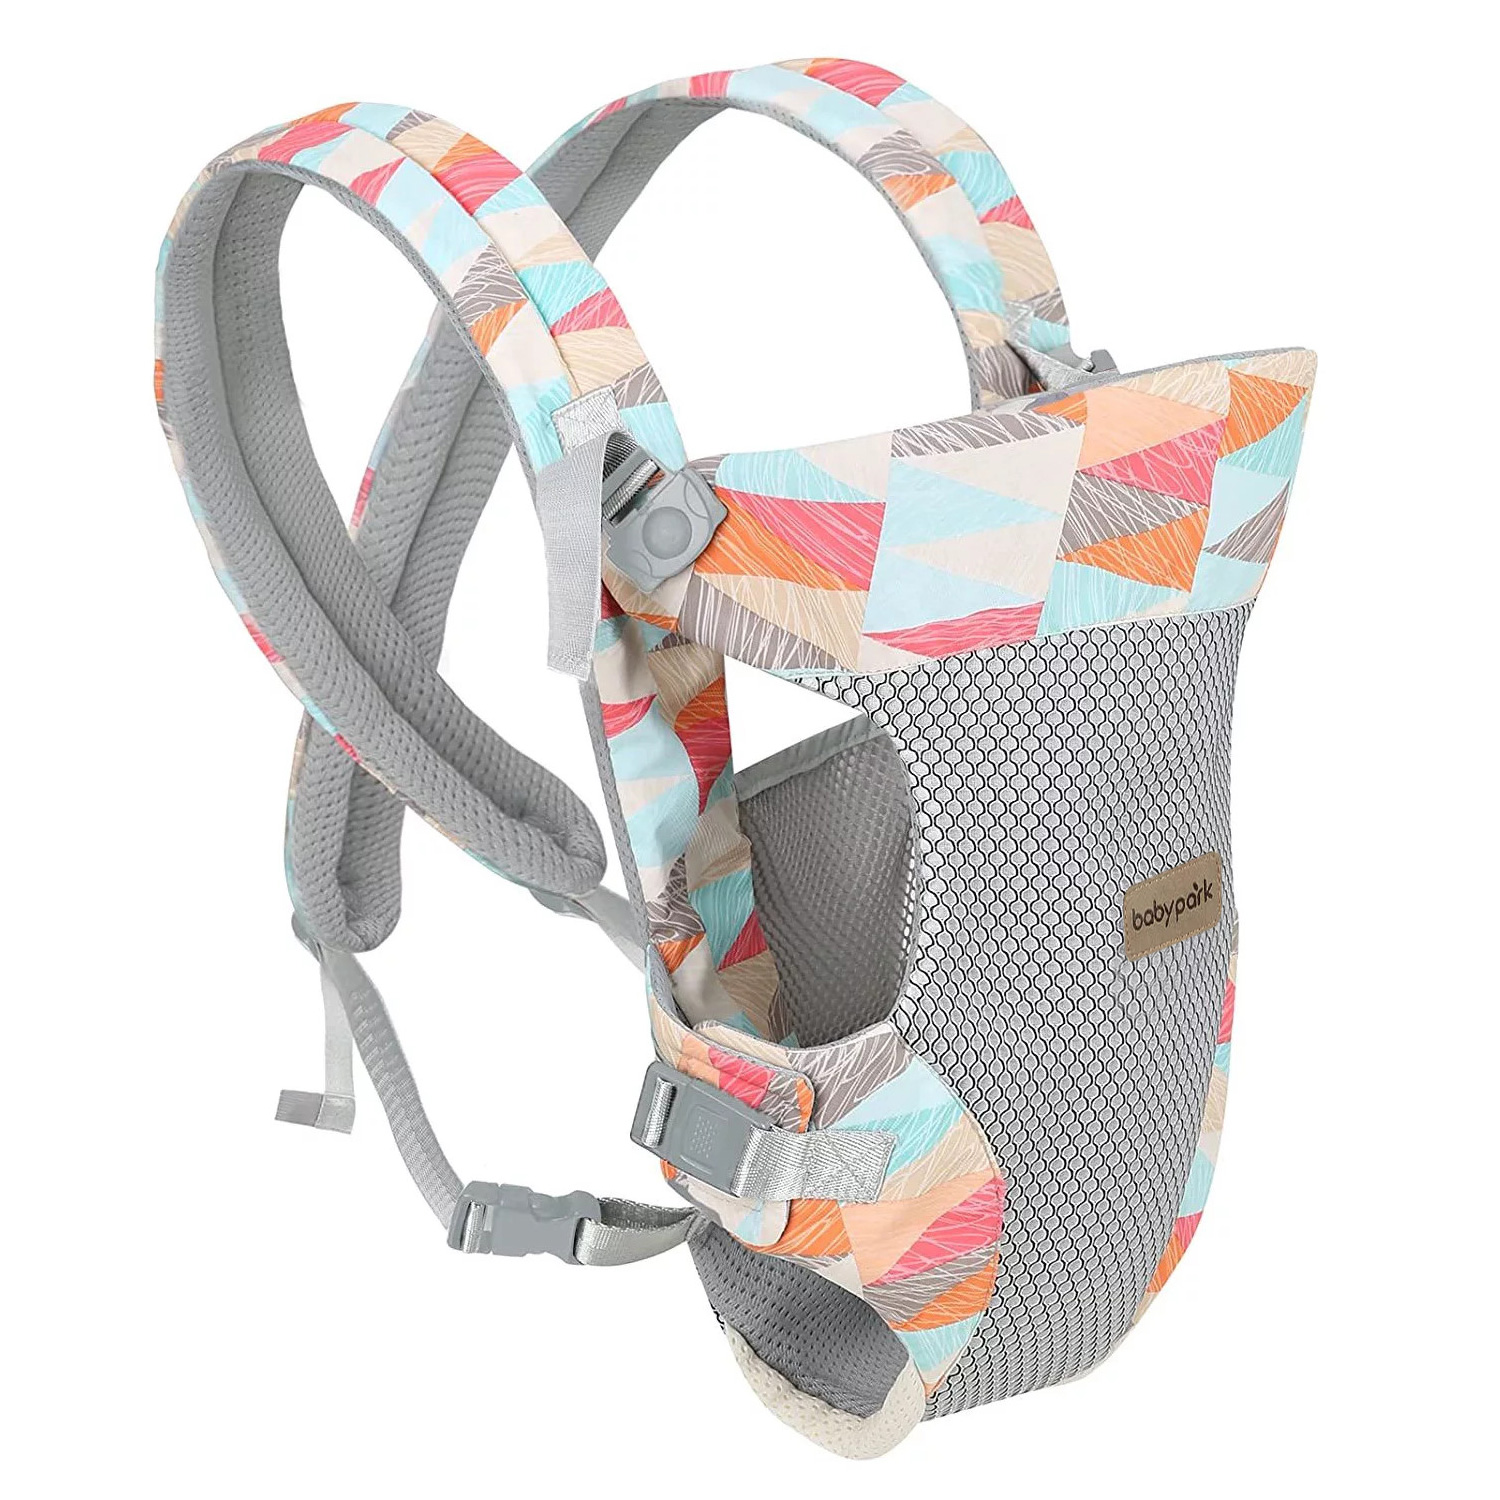 Yadala Baby Carrier, 4-in-1 Colorful Baby Carrier, Front and Back Baby Sling with Adjustable Holder - image 3 of 8